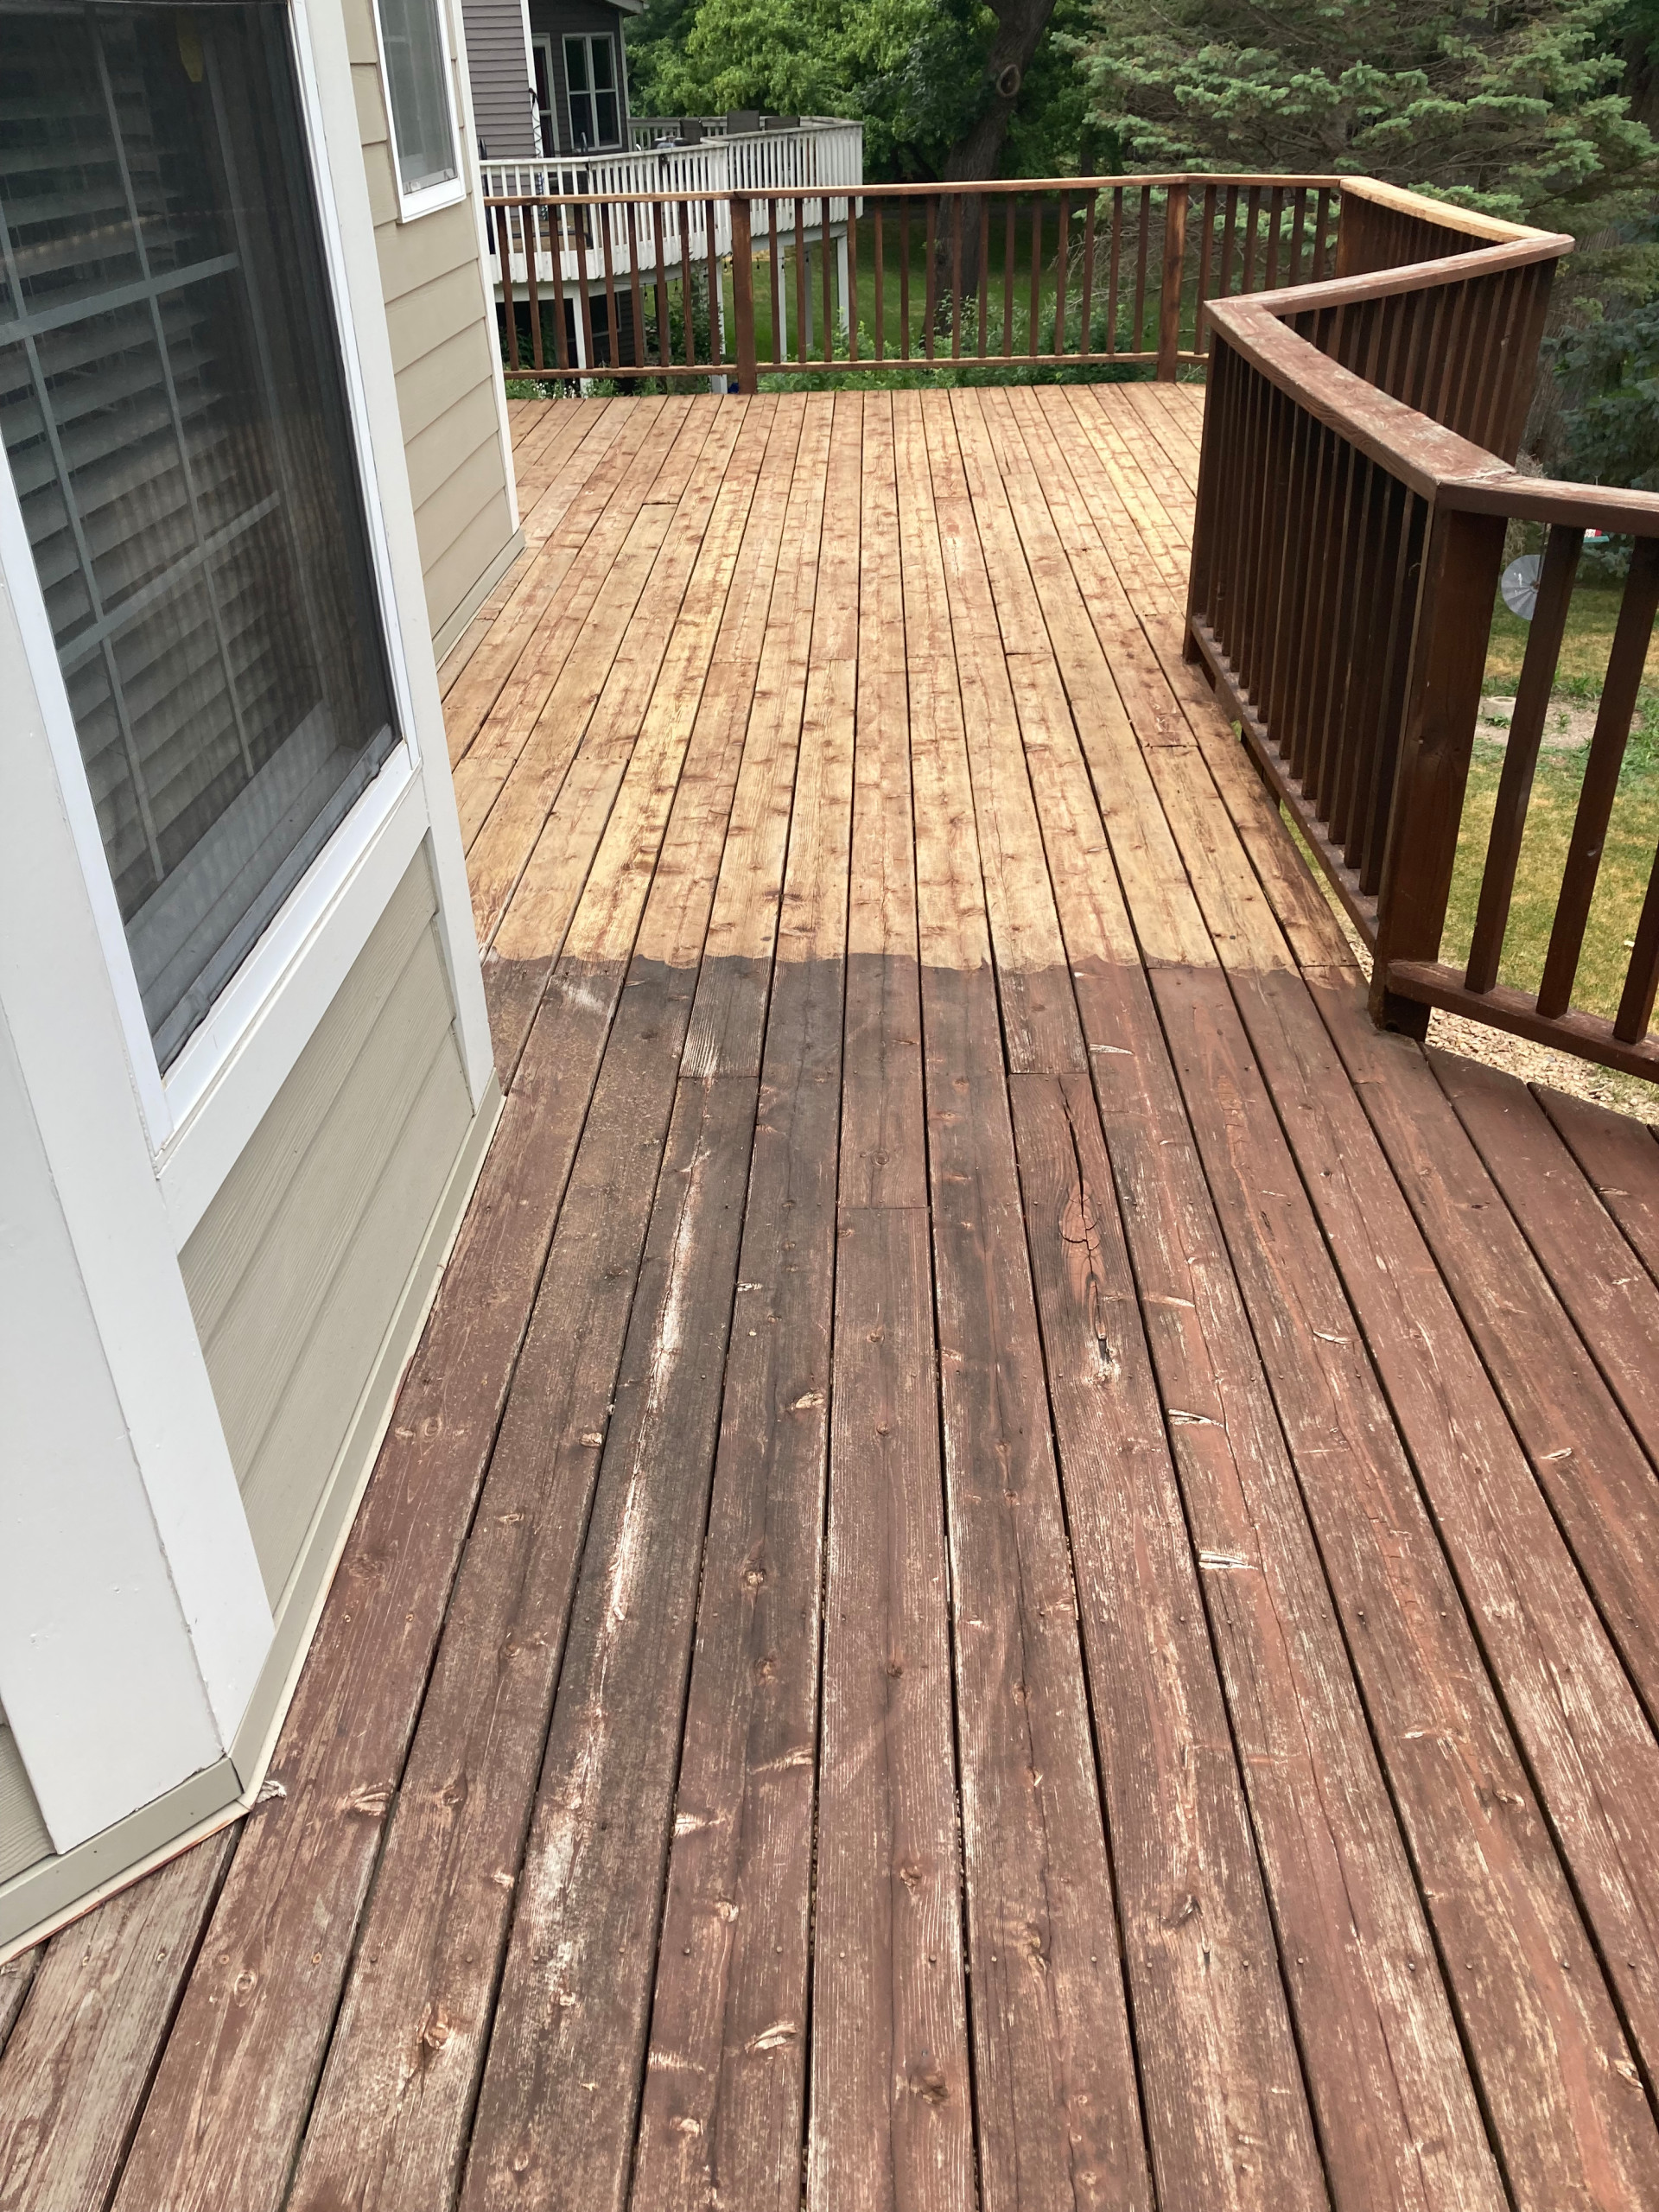 Foley Deck - Before and After Pressure Washing